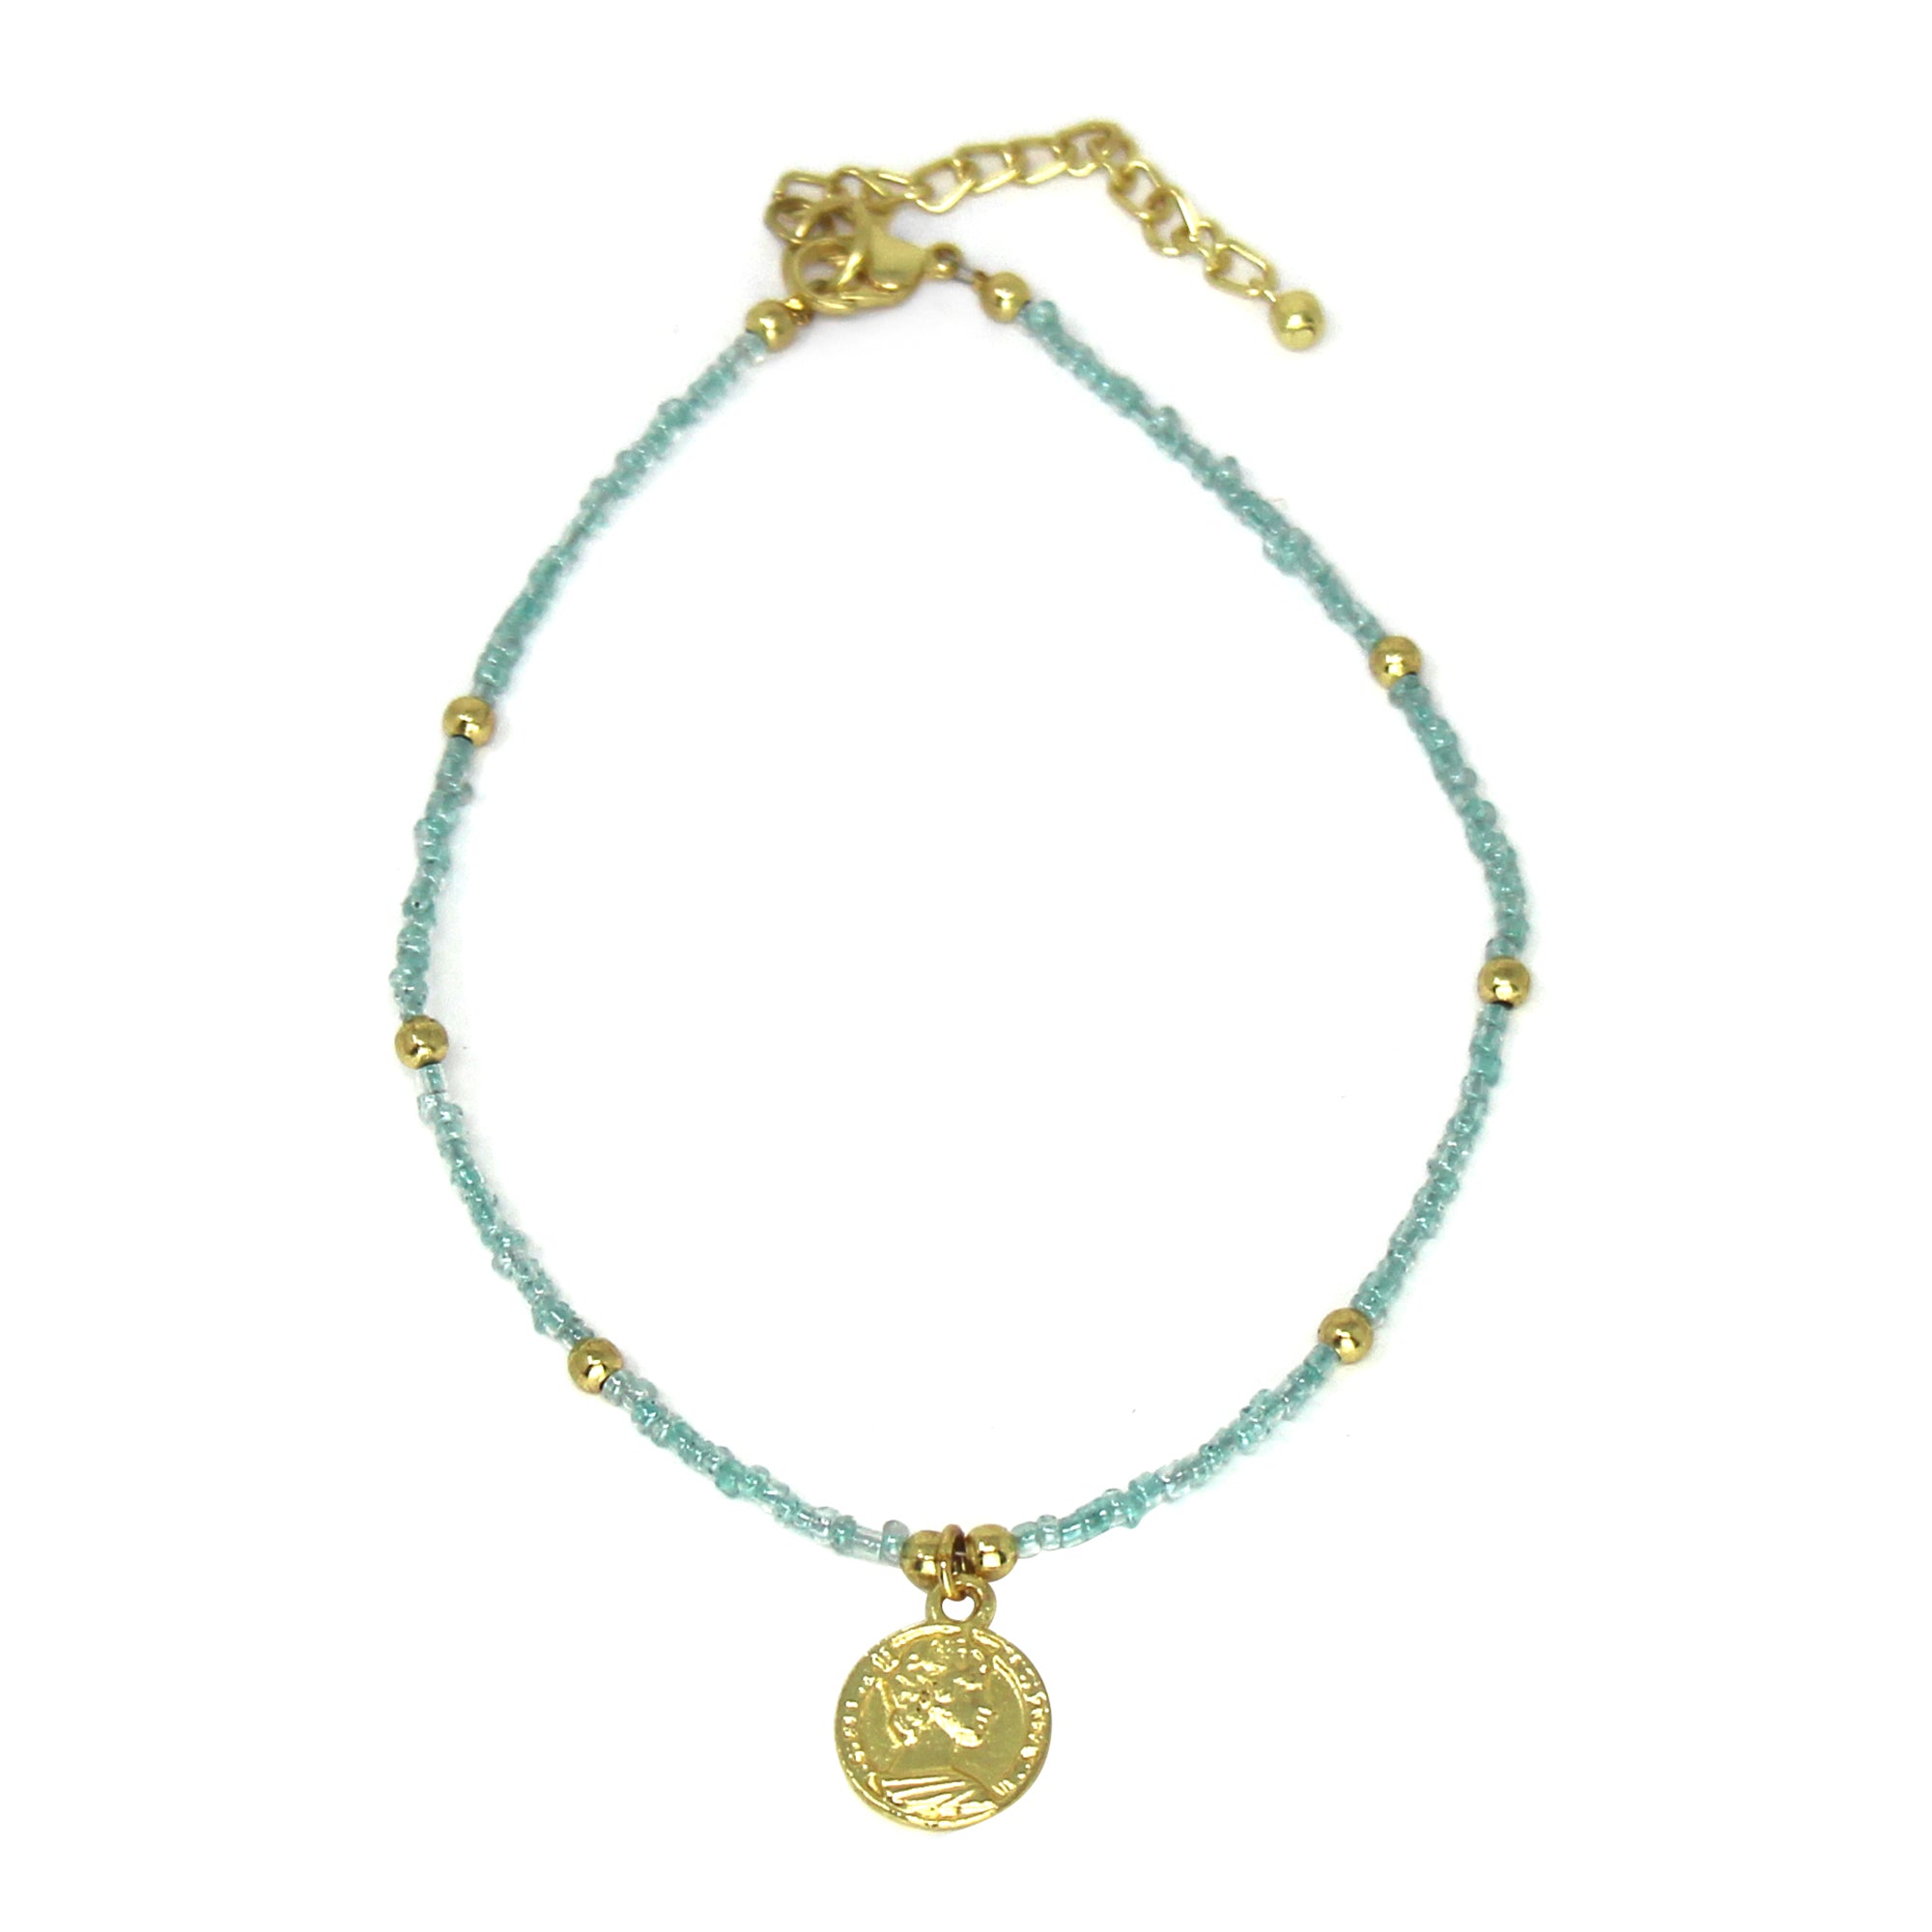 Baby blue Glass Bead Choker with Golden Coin Pendant- Pack of 3